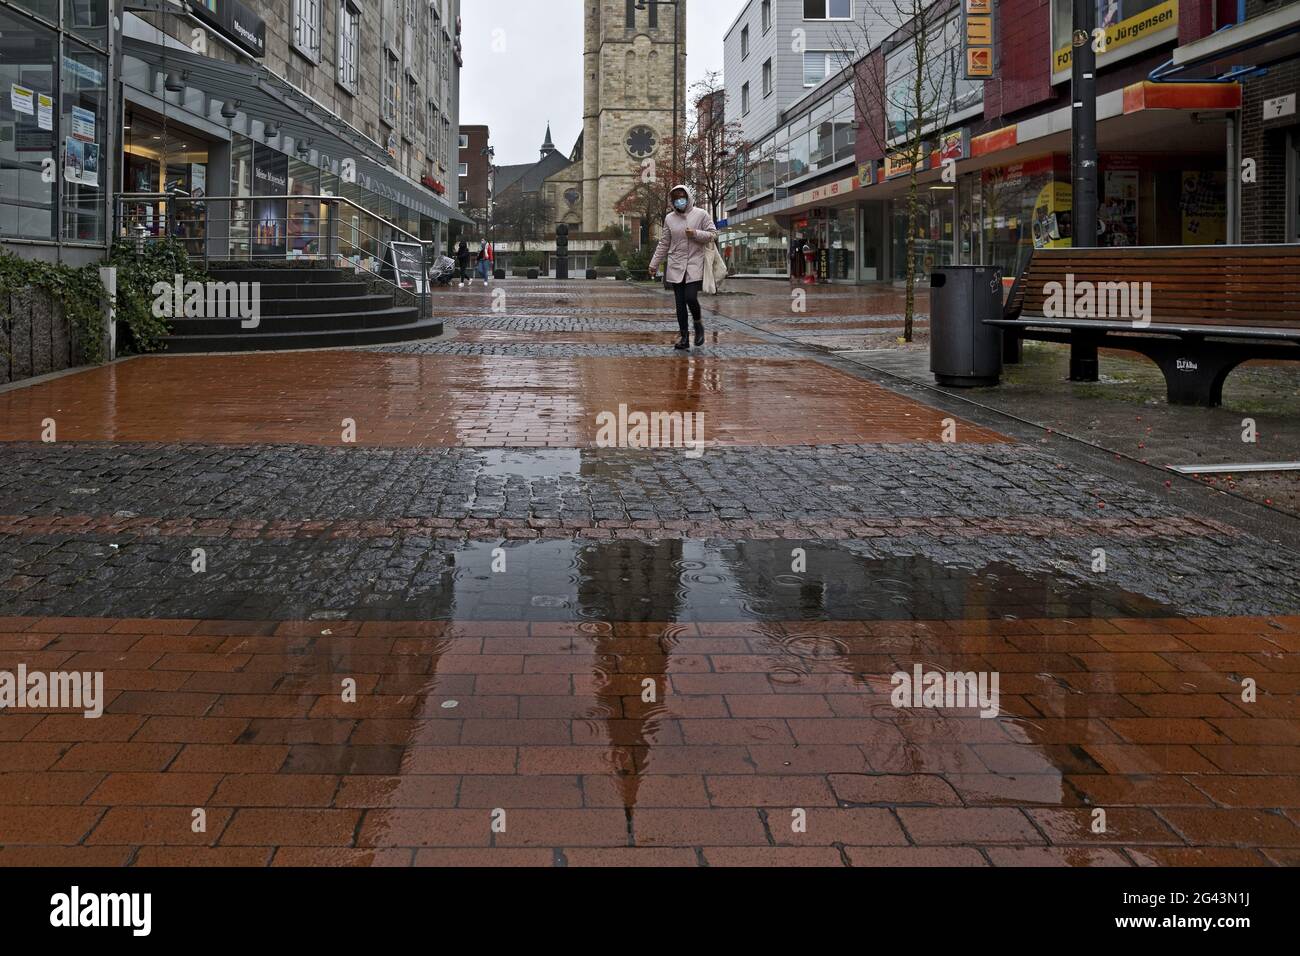 Rain in the pedestrian zone during the corona pandemic, city center, Castrop-Rauxel, Germany, Europe Stock Photo